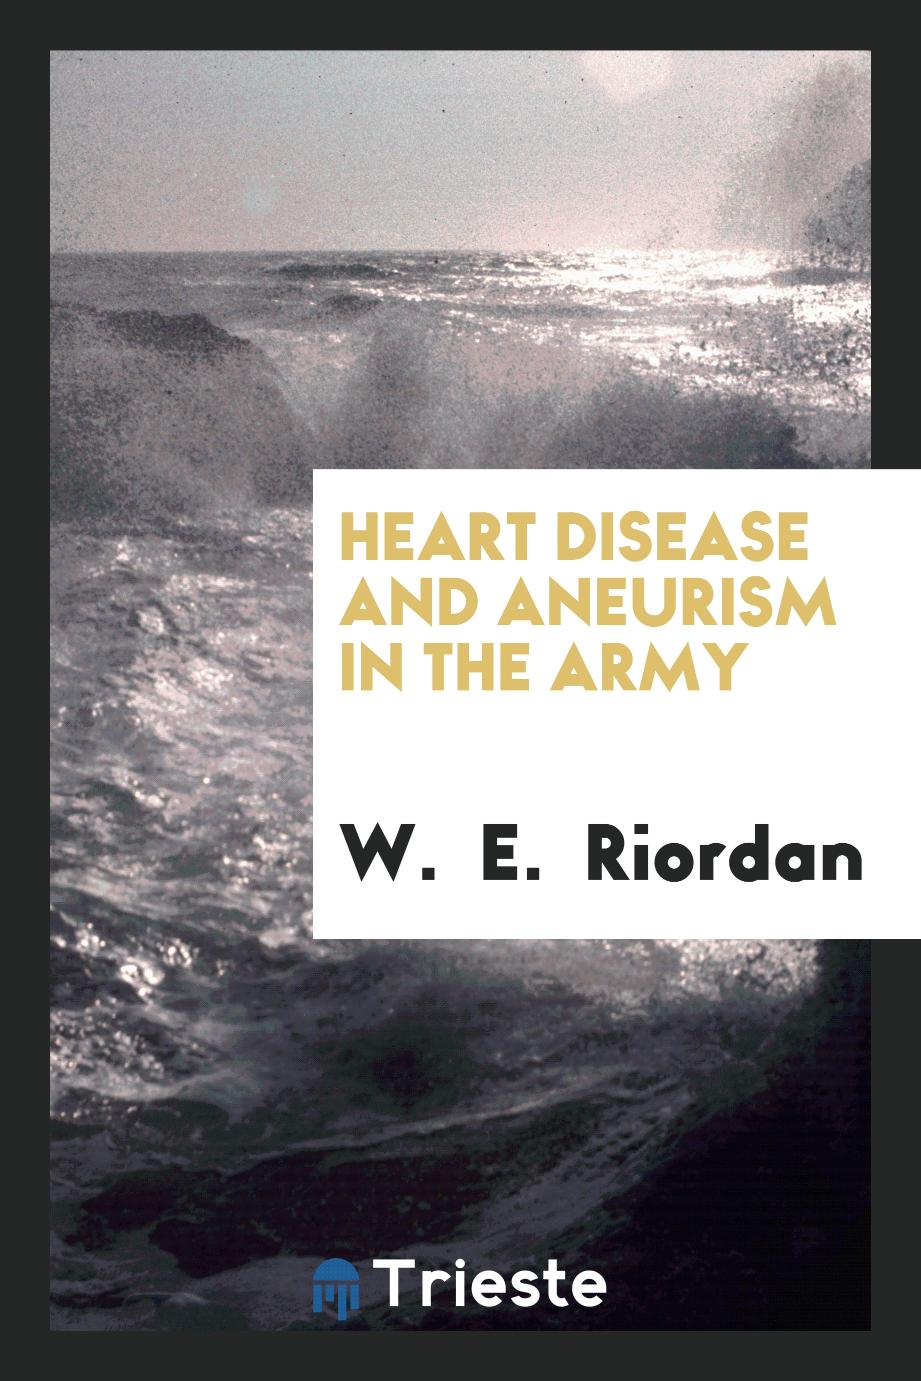 Heart Disease and Aneurism in the Army